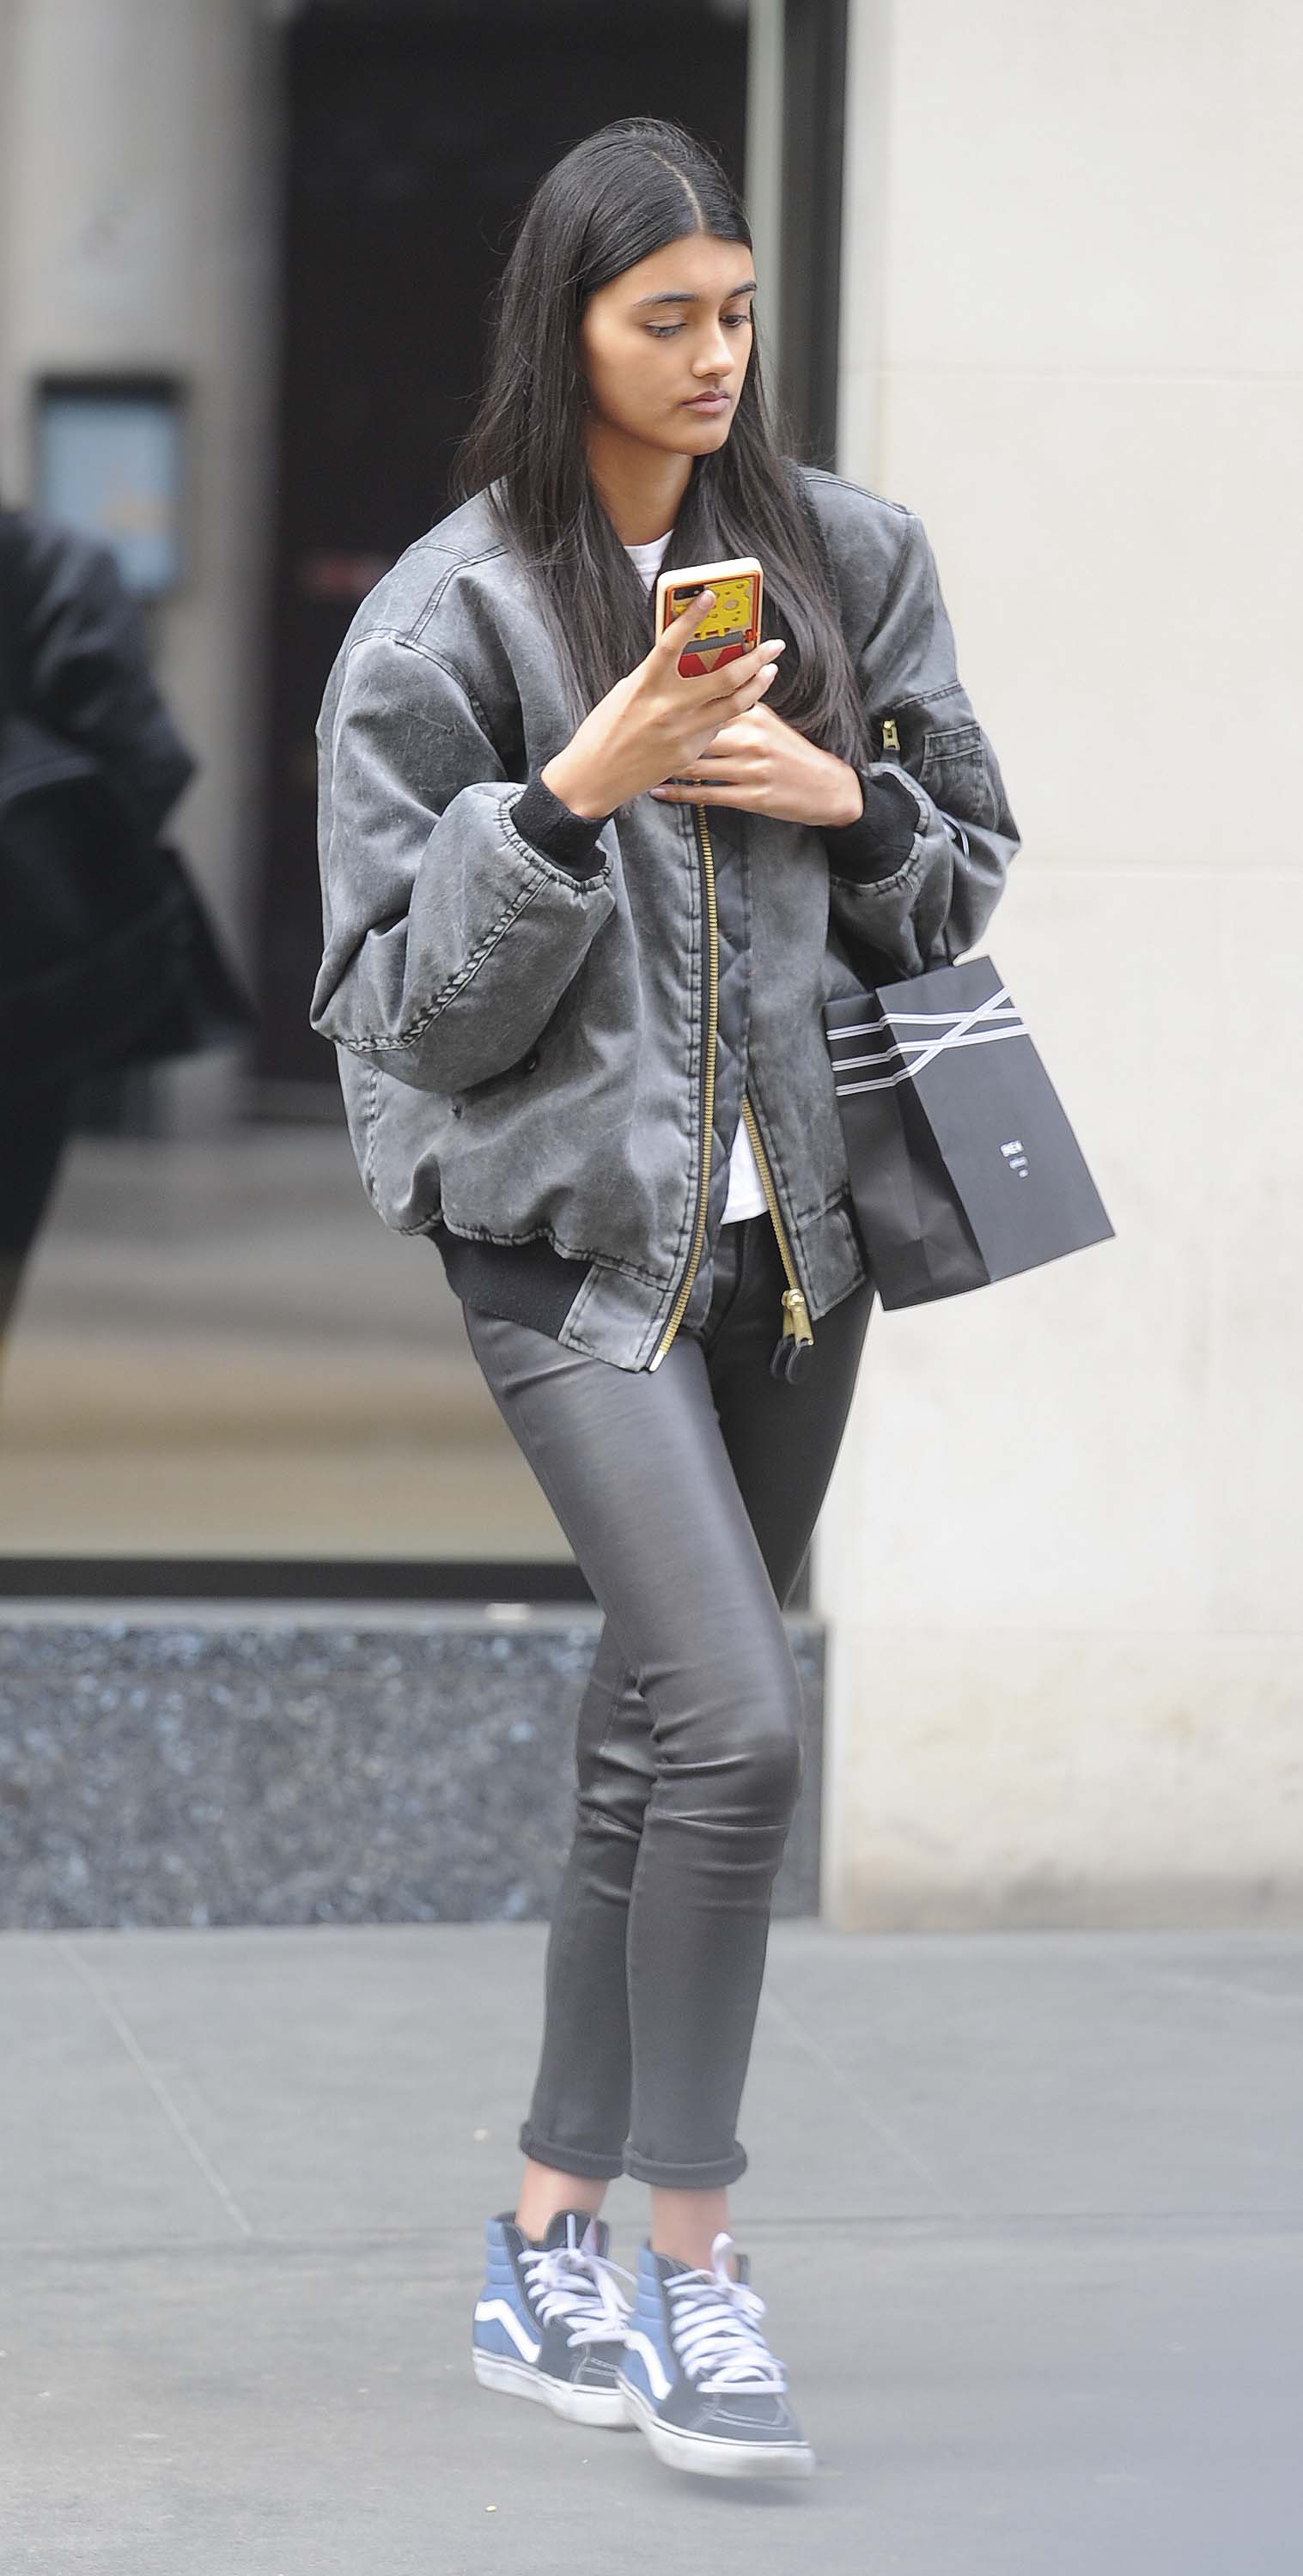 Neelam Gill out and about in London